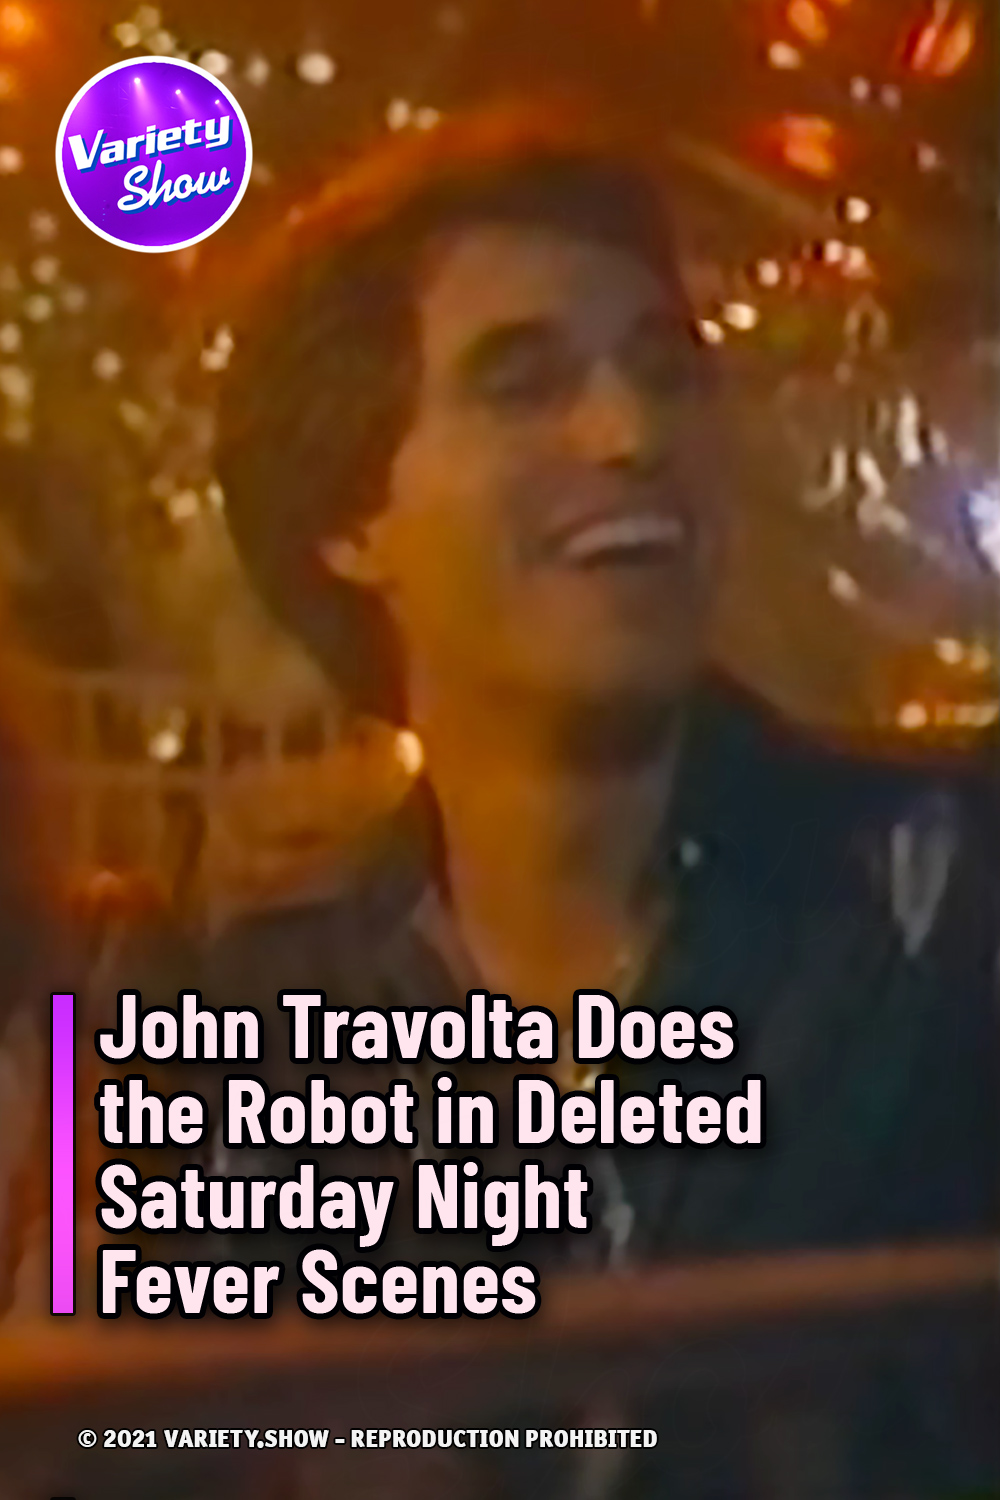 John Travolta Does the Robot in Deleted Saturday Night Fever Scenes